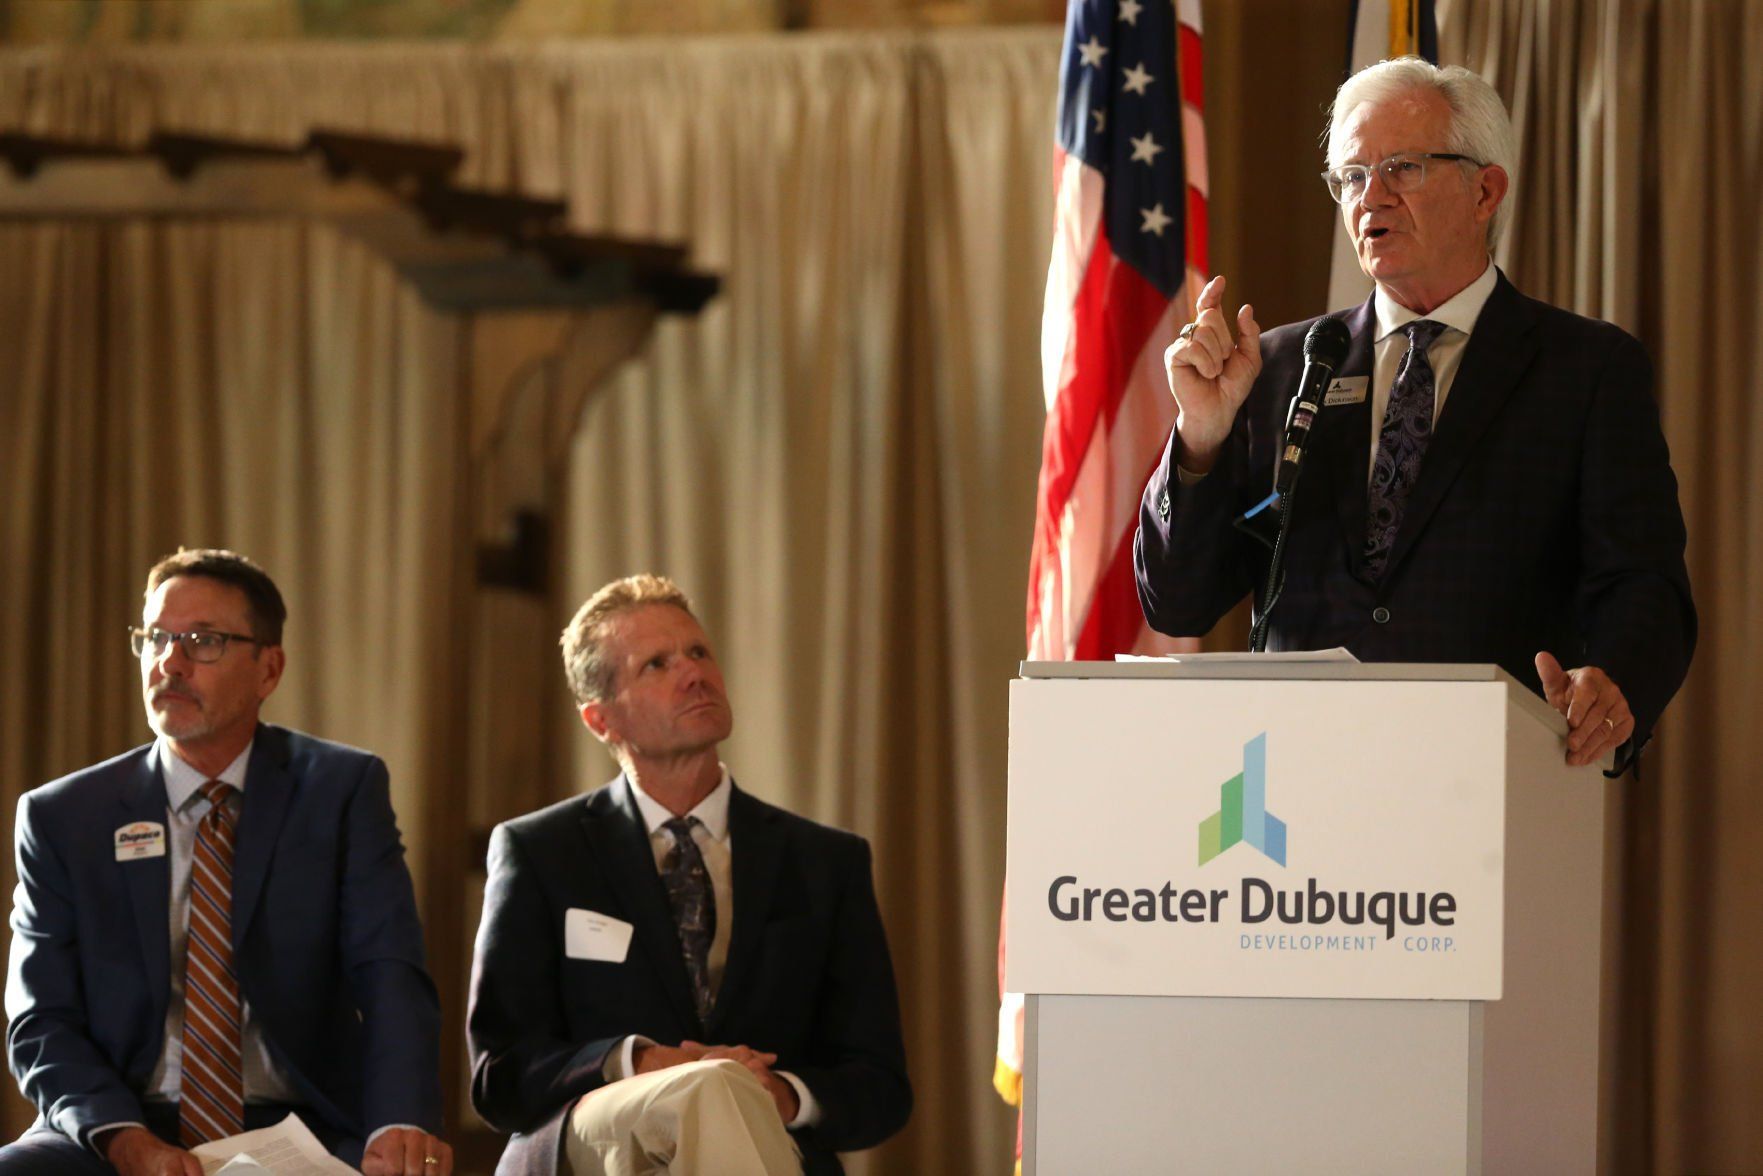 Rick Dickinson, president and CEO of Greater Dubuque Development Corp., speaks on Thursday during the organization’s annual meeting at Steeple Square in Dubuque.    PHOTO CREDIT: JESSICA REILLY